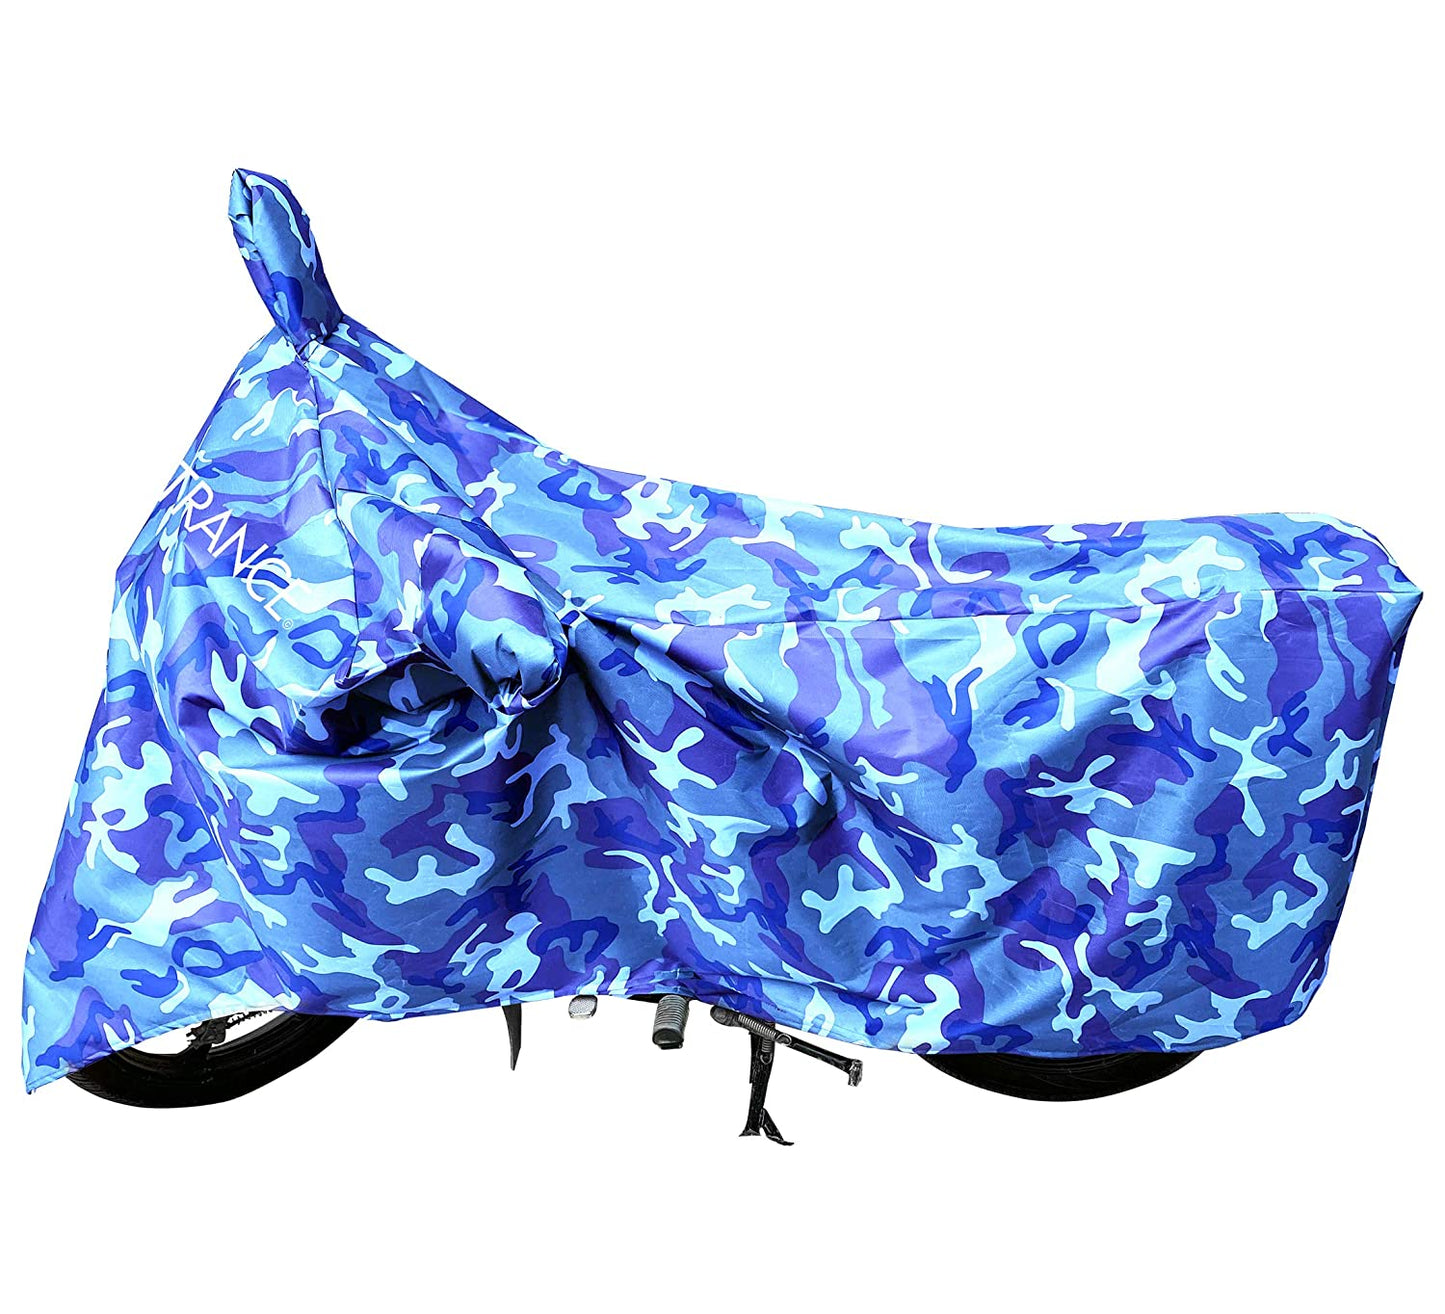 MotoTrance Jungle Bike Body Covers For Techo Electra Emerge 2019 - Interlock-Stitched Waterproof and Heat Resistant with Mirror Pockets